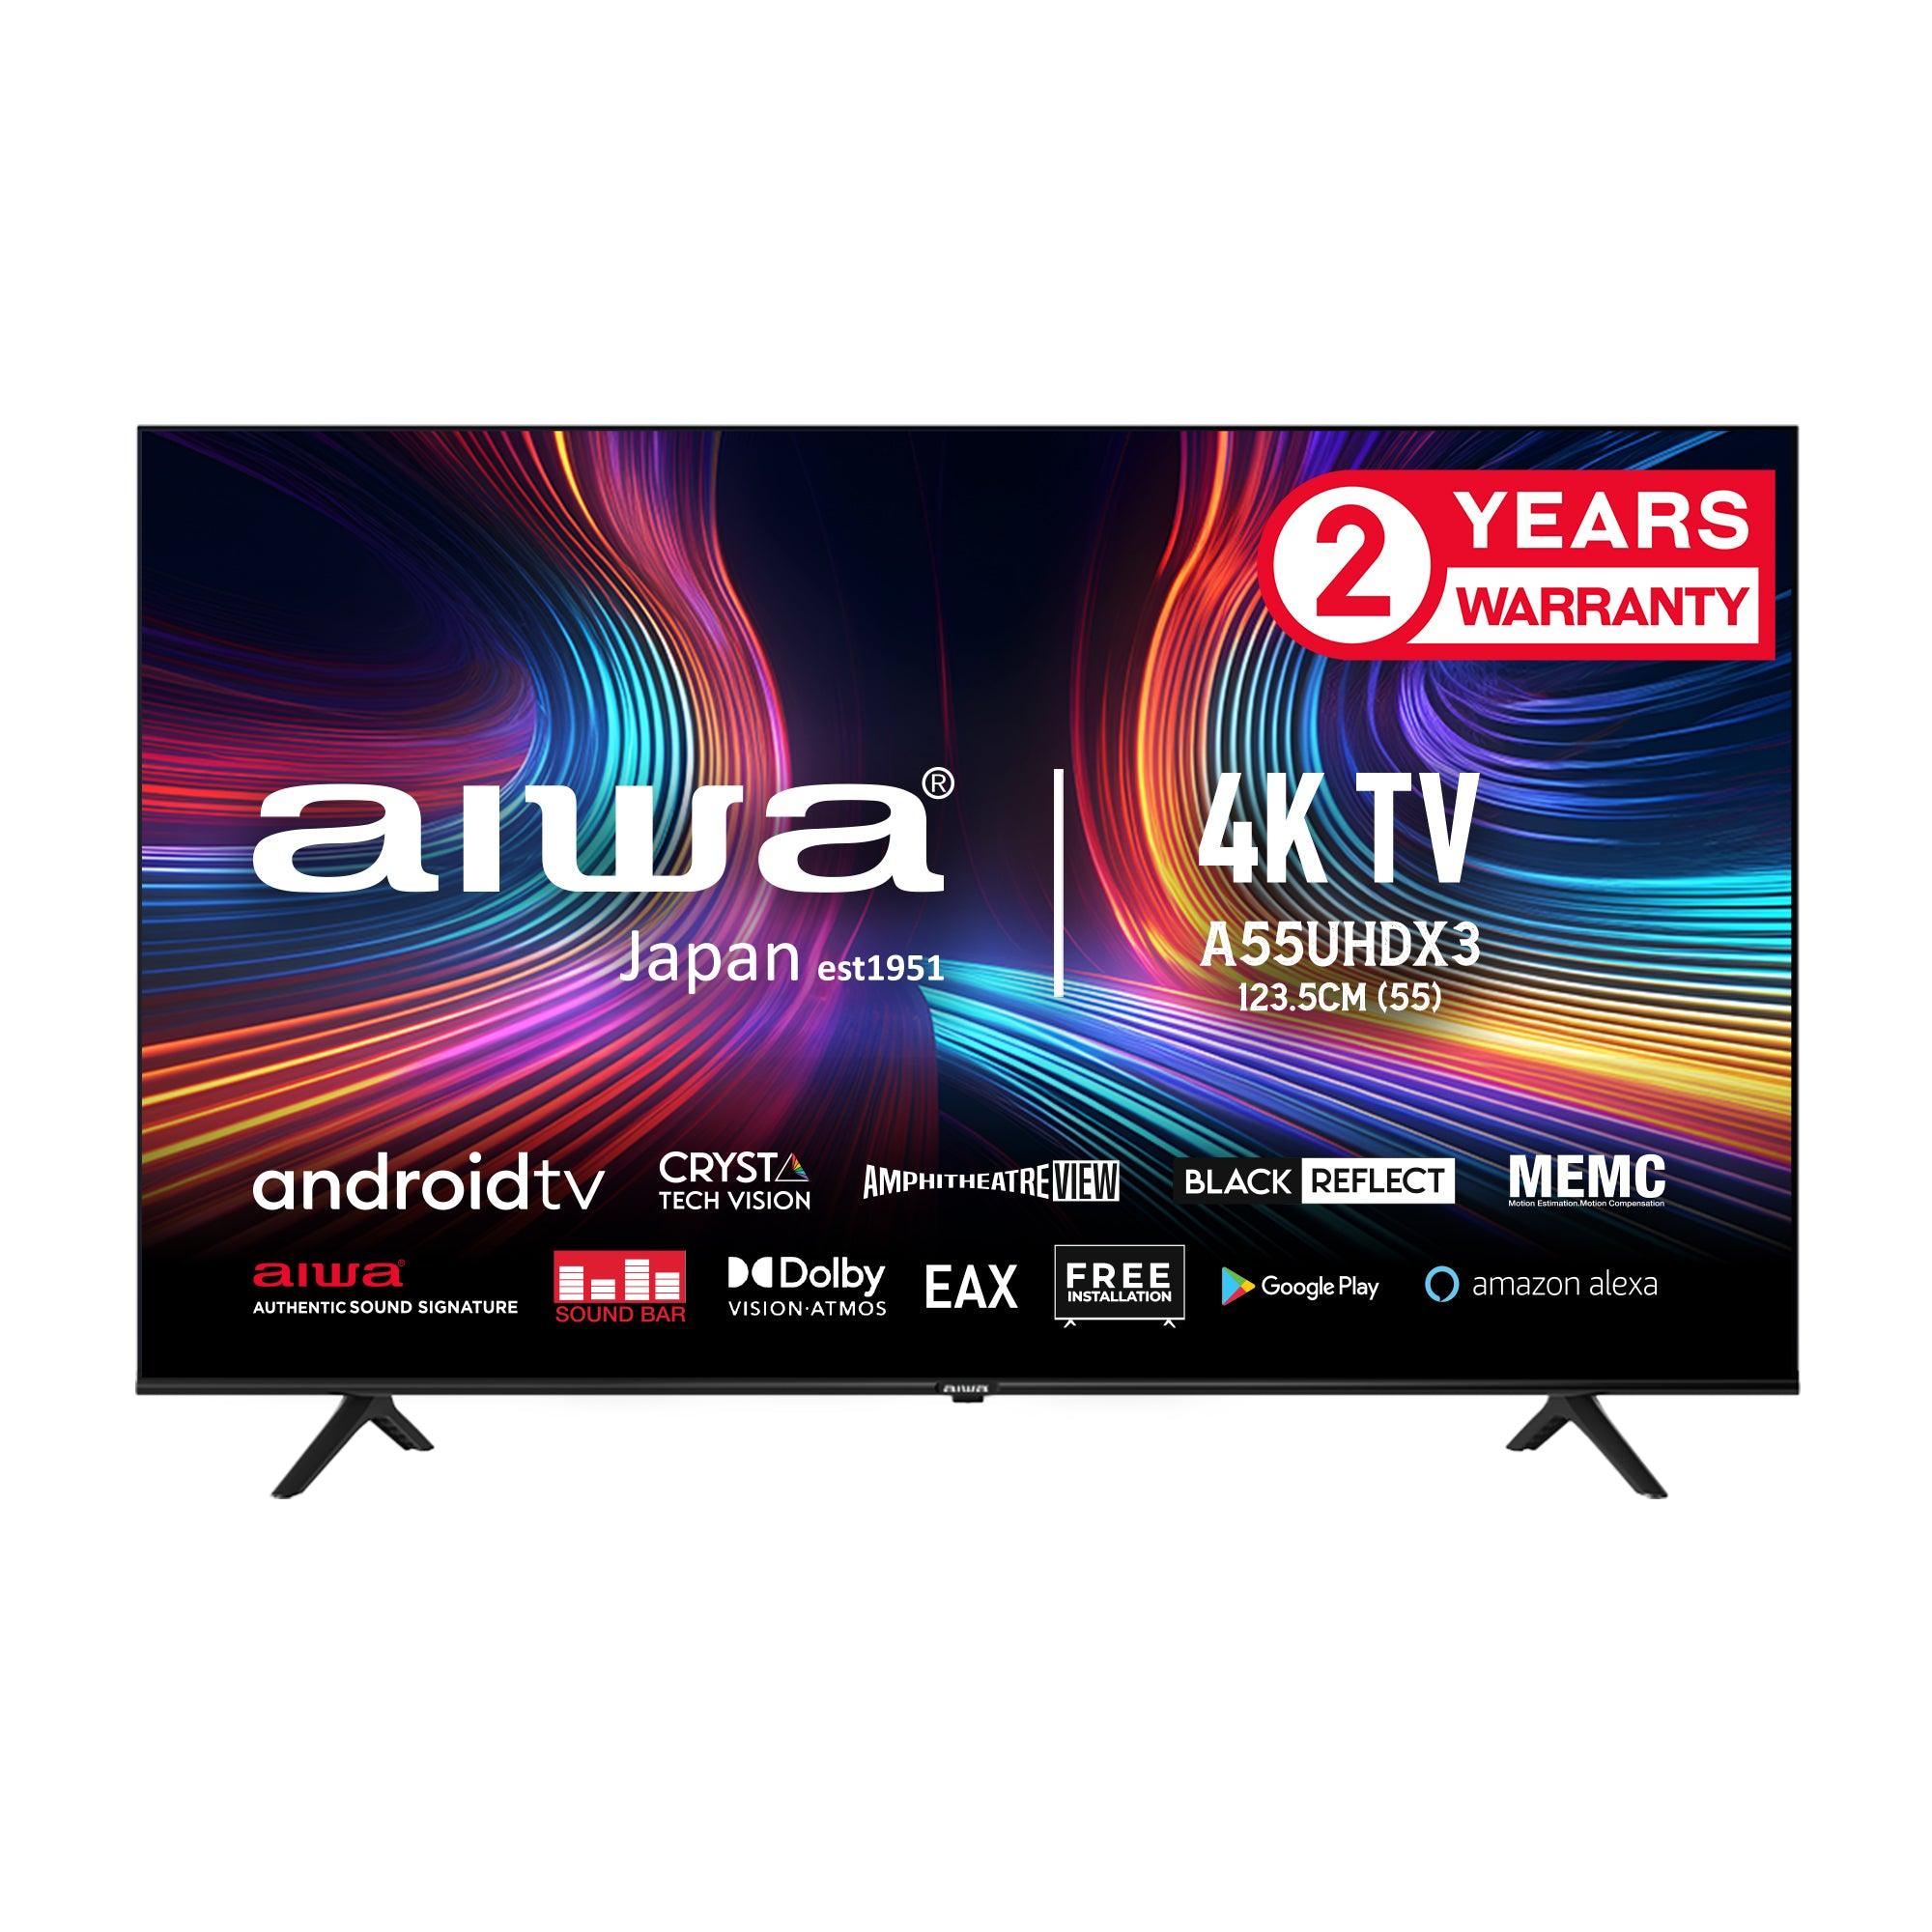 AIWA MAGNIFIQ 108 cm (43 inches) Full HD 1080 Smart Android LED TV Crystal Vision Technology with Google Play Alexa, Ultra HD Smart LED Google TV 42.84 W with 1 Year Warranty Black - Global Plugin